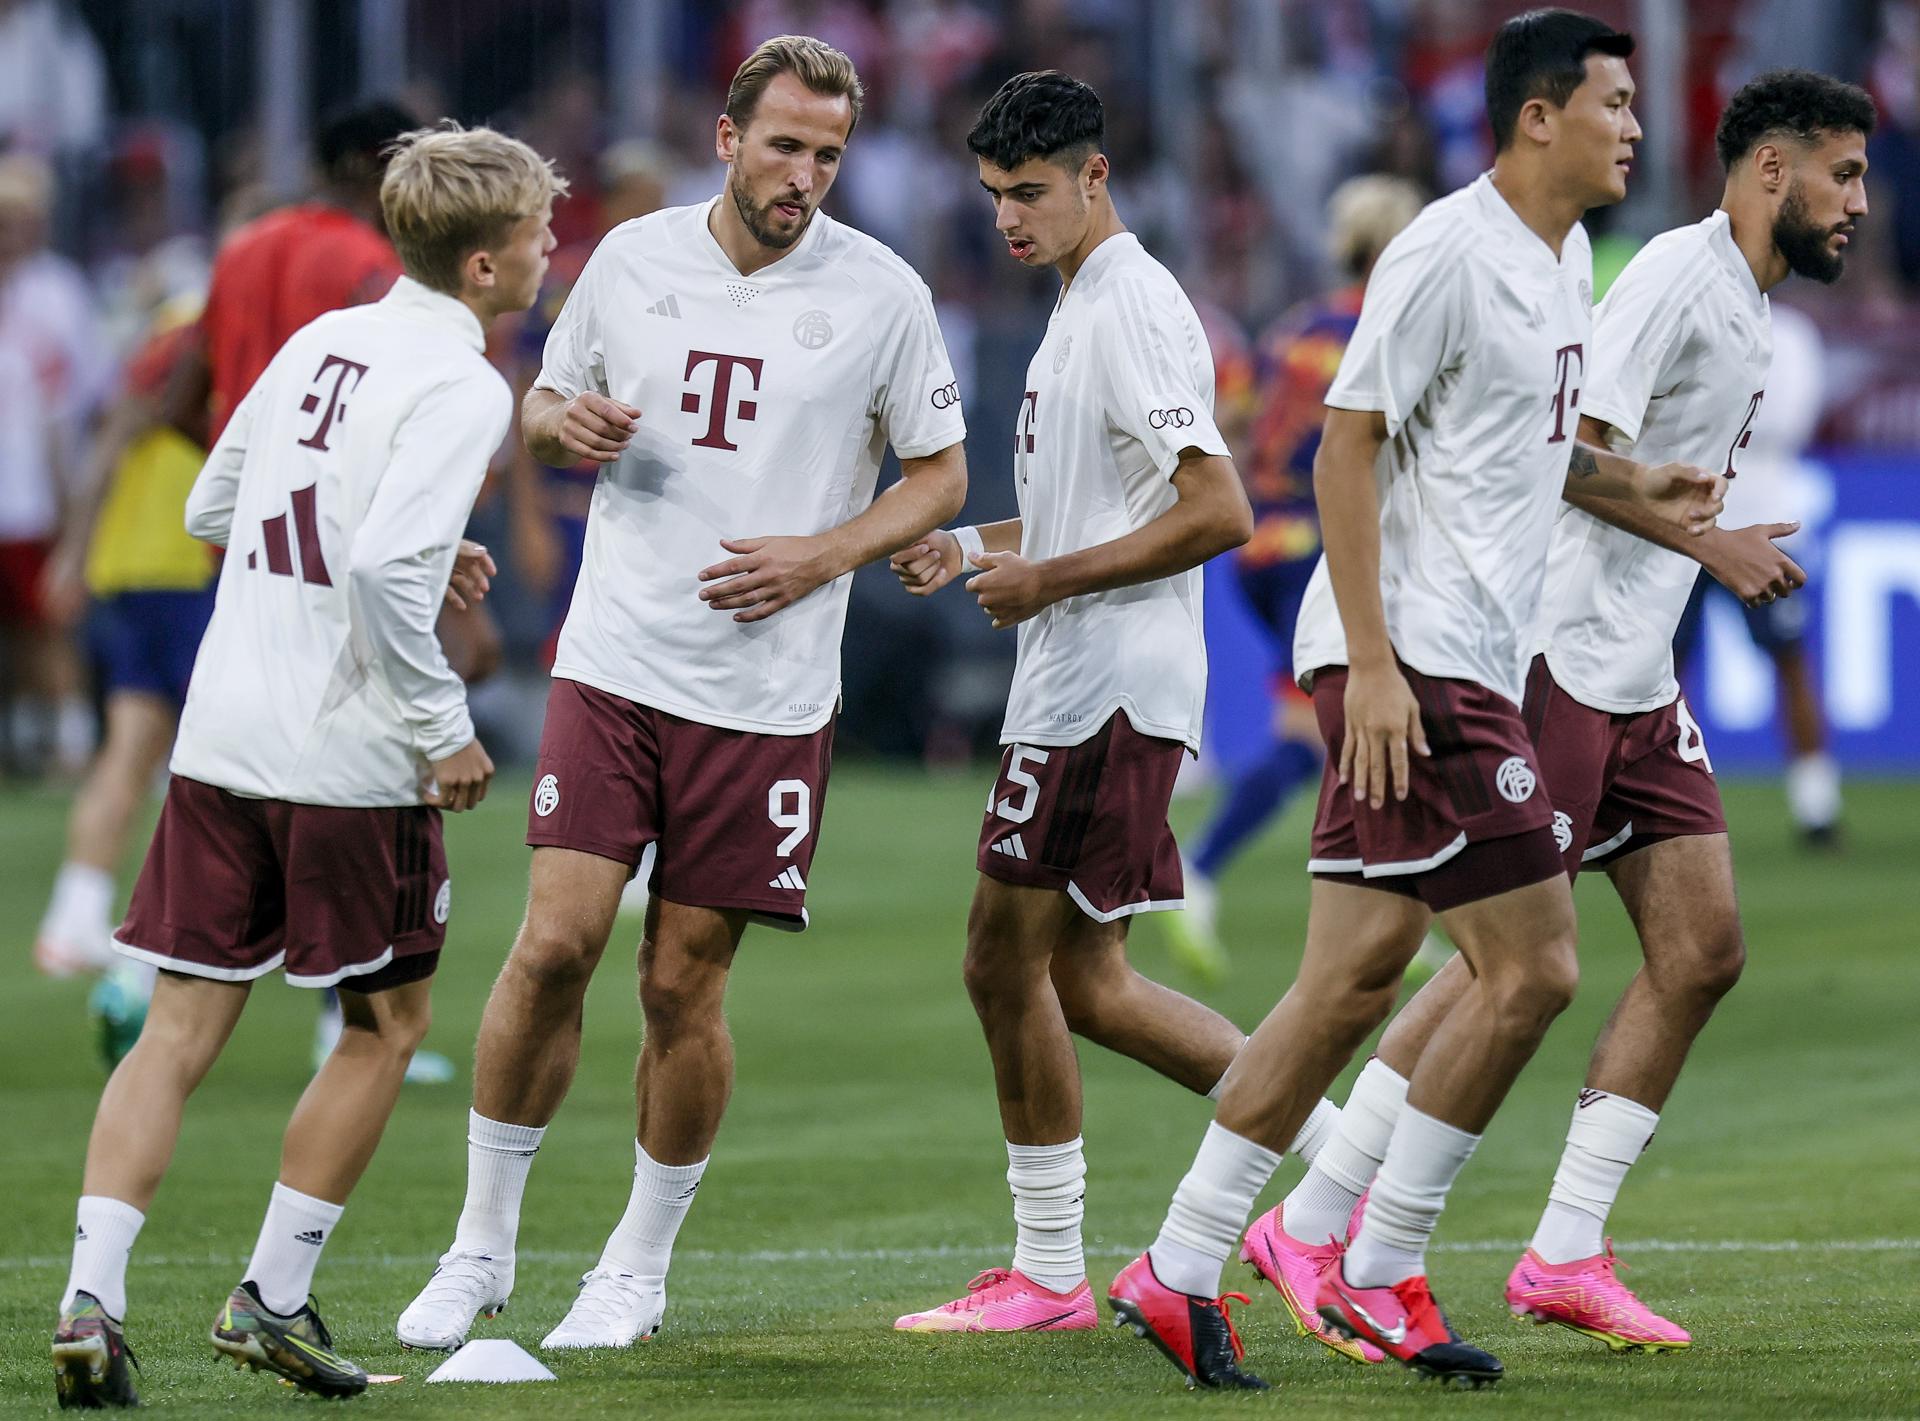 Bayern Munich's new player, Harry Kane (second from left), warms up before a German Super Cup soccer match between FC Bayern Munich and RB Leipzig in Munich, Germany, on 12 August 2023. EFE/EPA/RONALD WITTEK CONDITIONS - ATTENTION: The DFL regulations prohibit any use of photographs as image sequences and/or quasi-video.